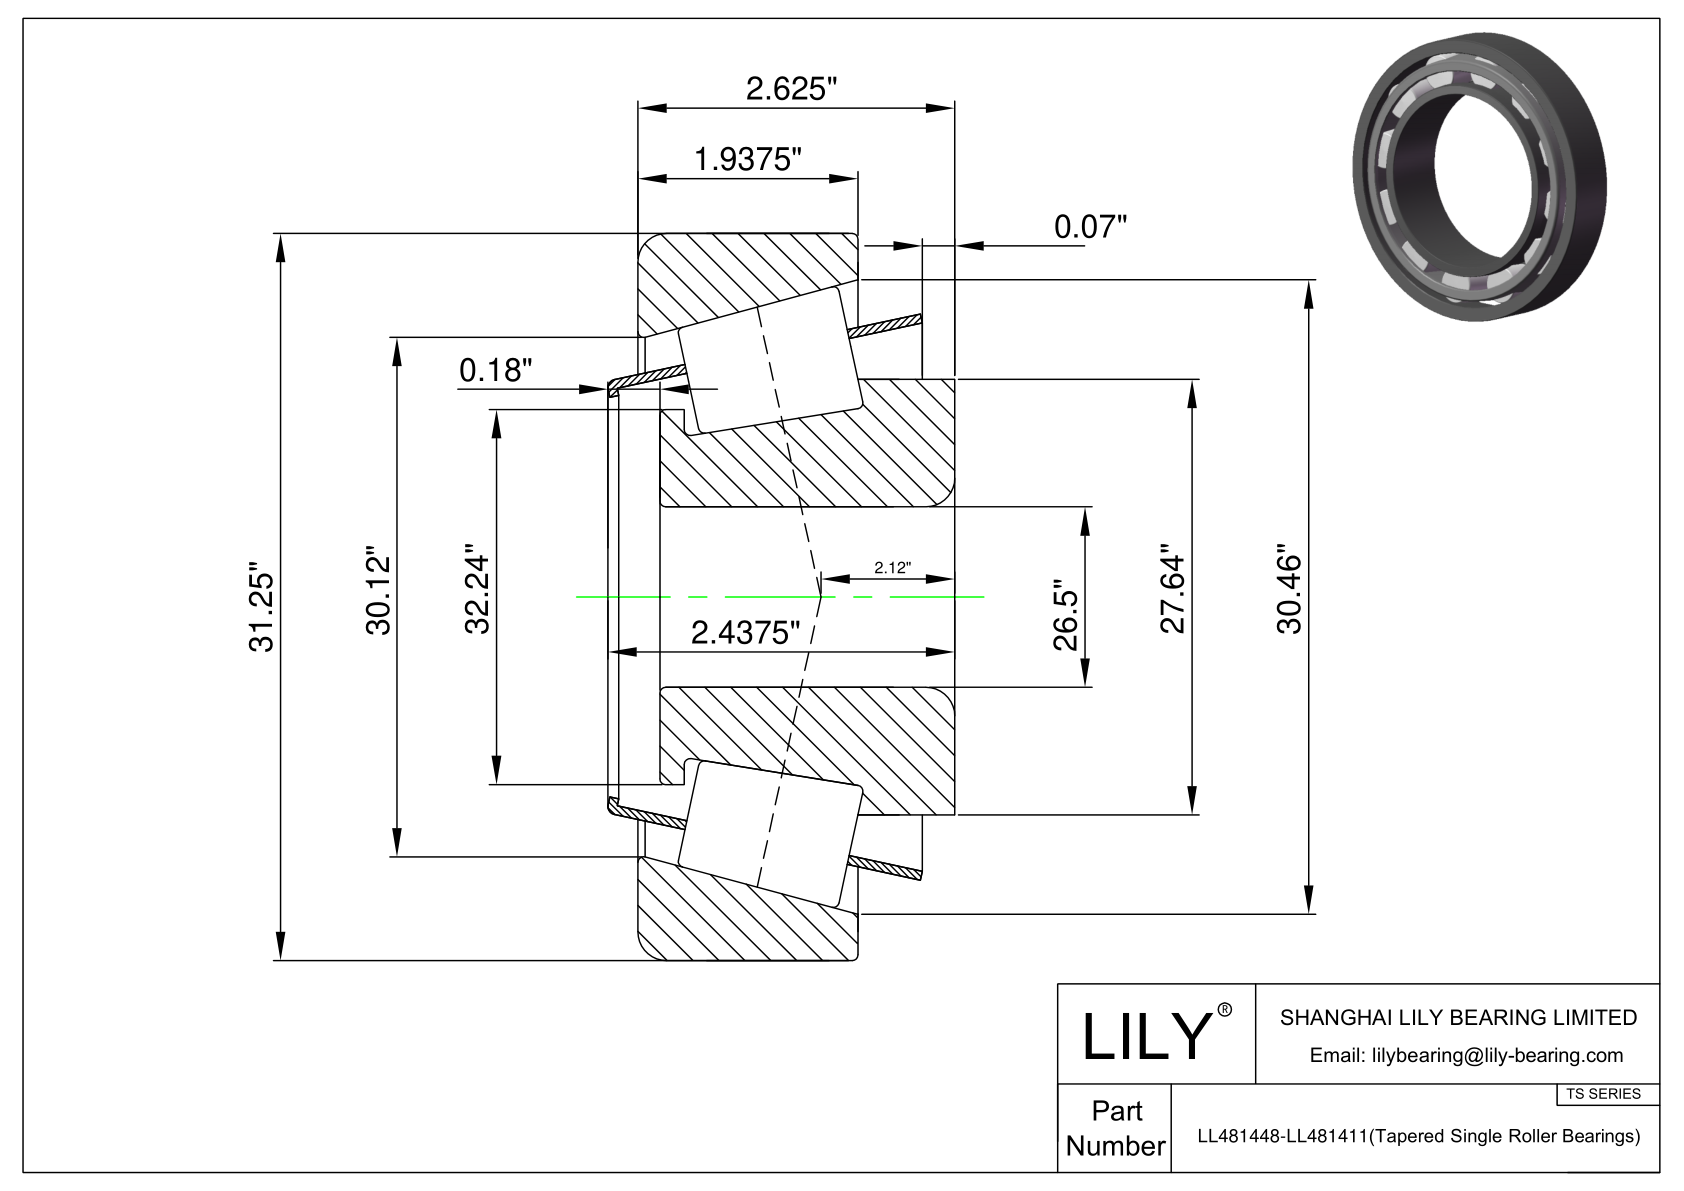 LL481448-LL481411 TS (Tapered Single Roller Bearings) (Imperial) cad drawing